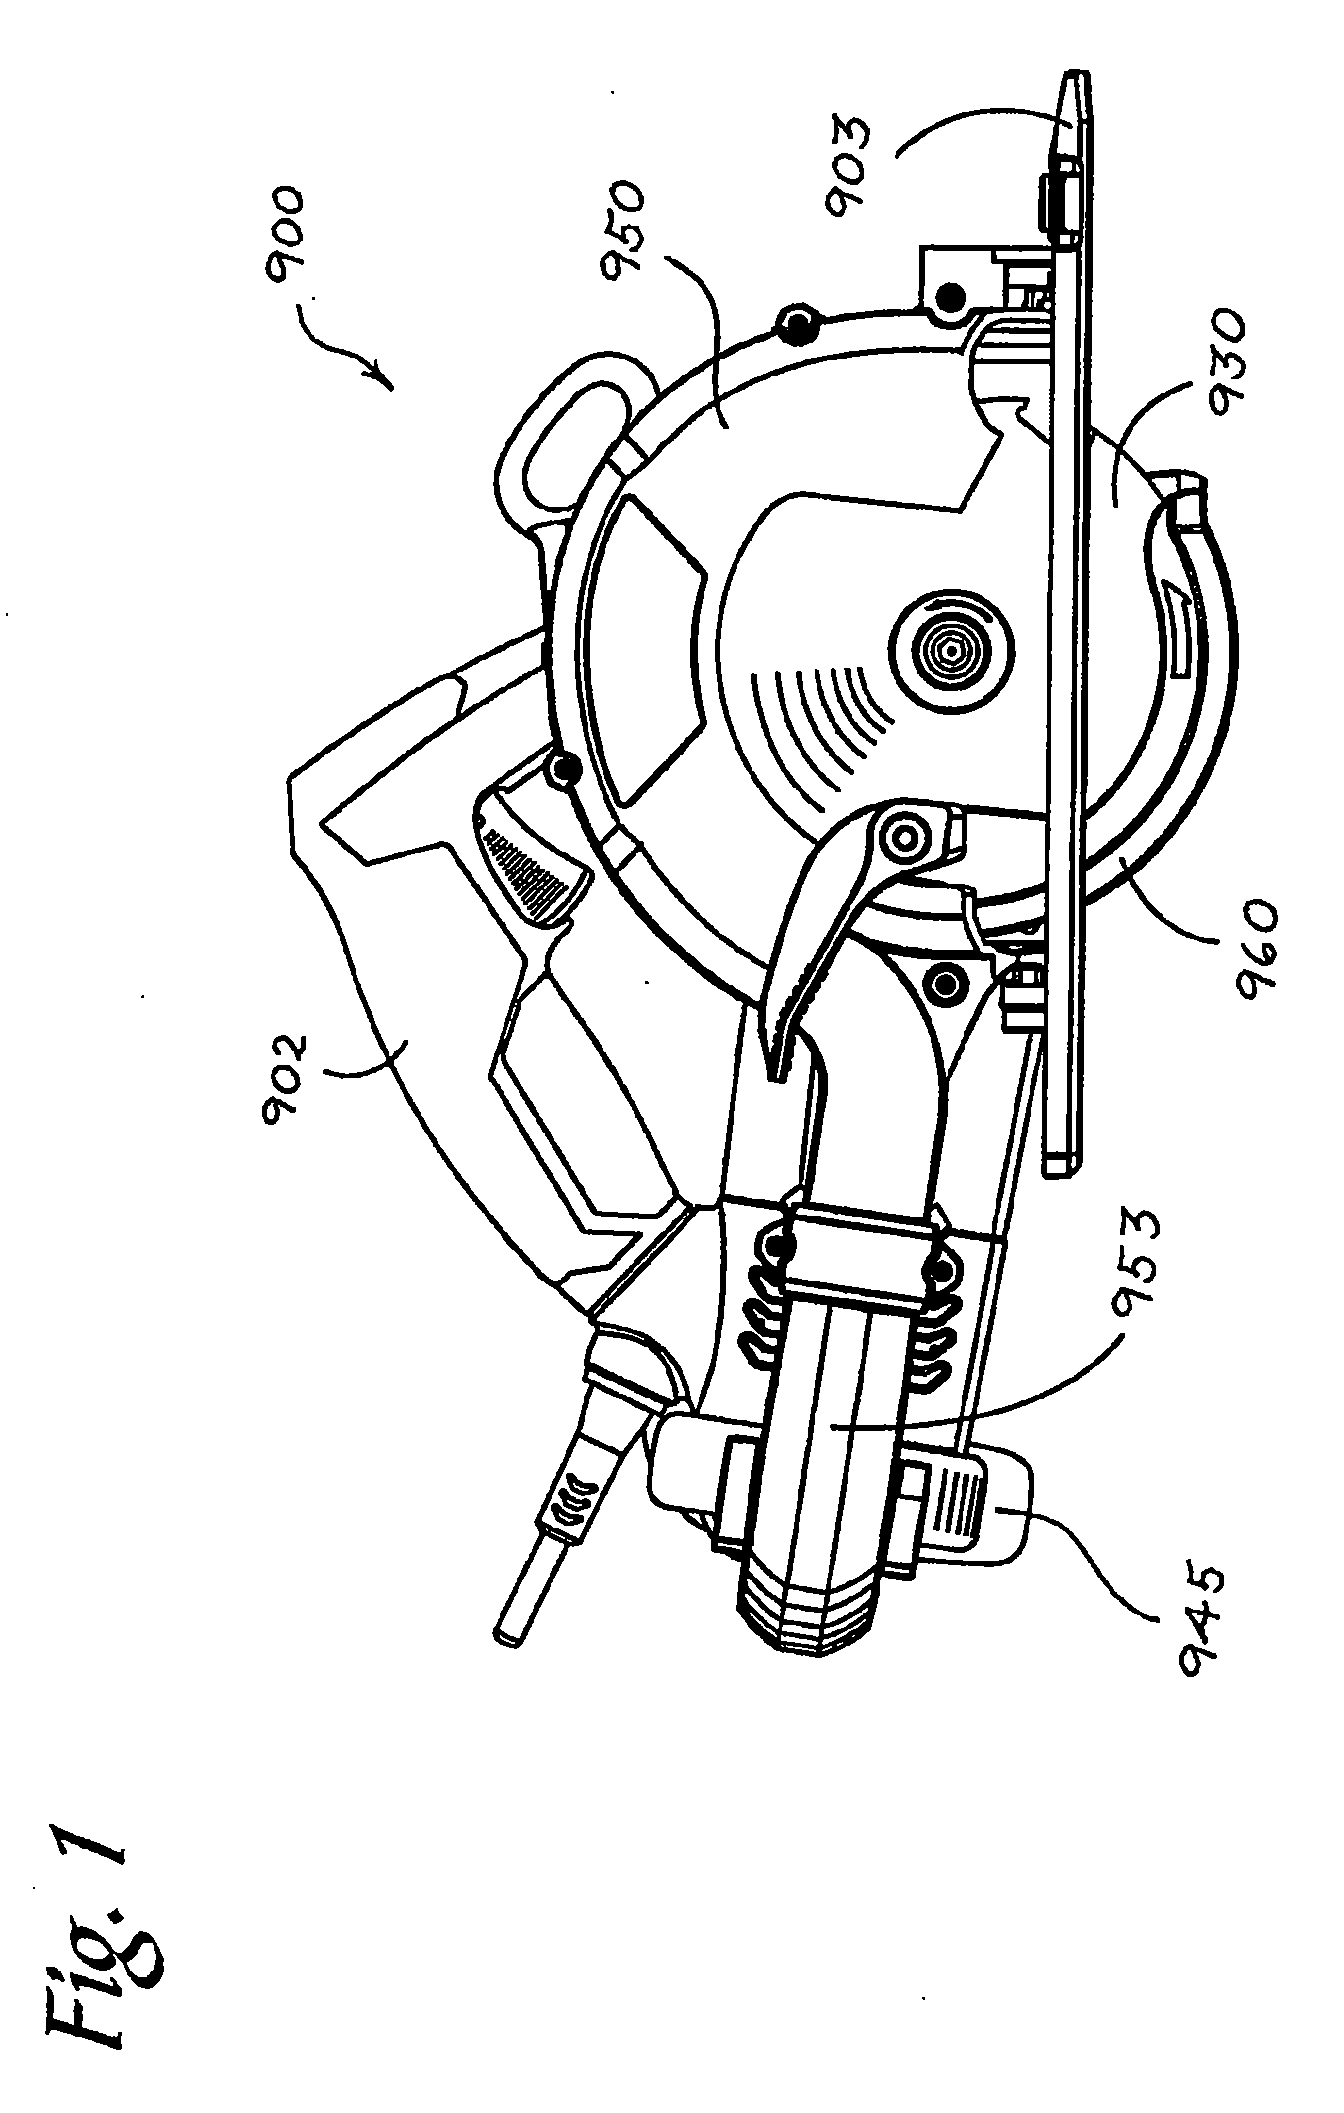 Blade Guard for Power Tool Having an Evacuation System